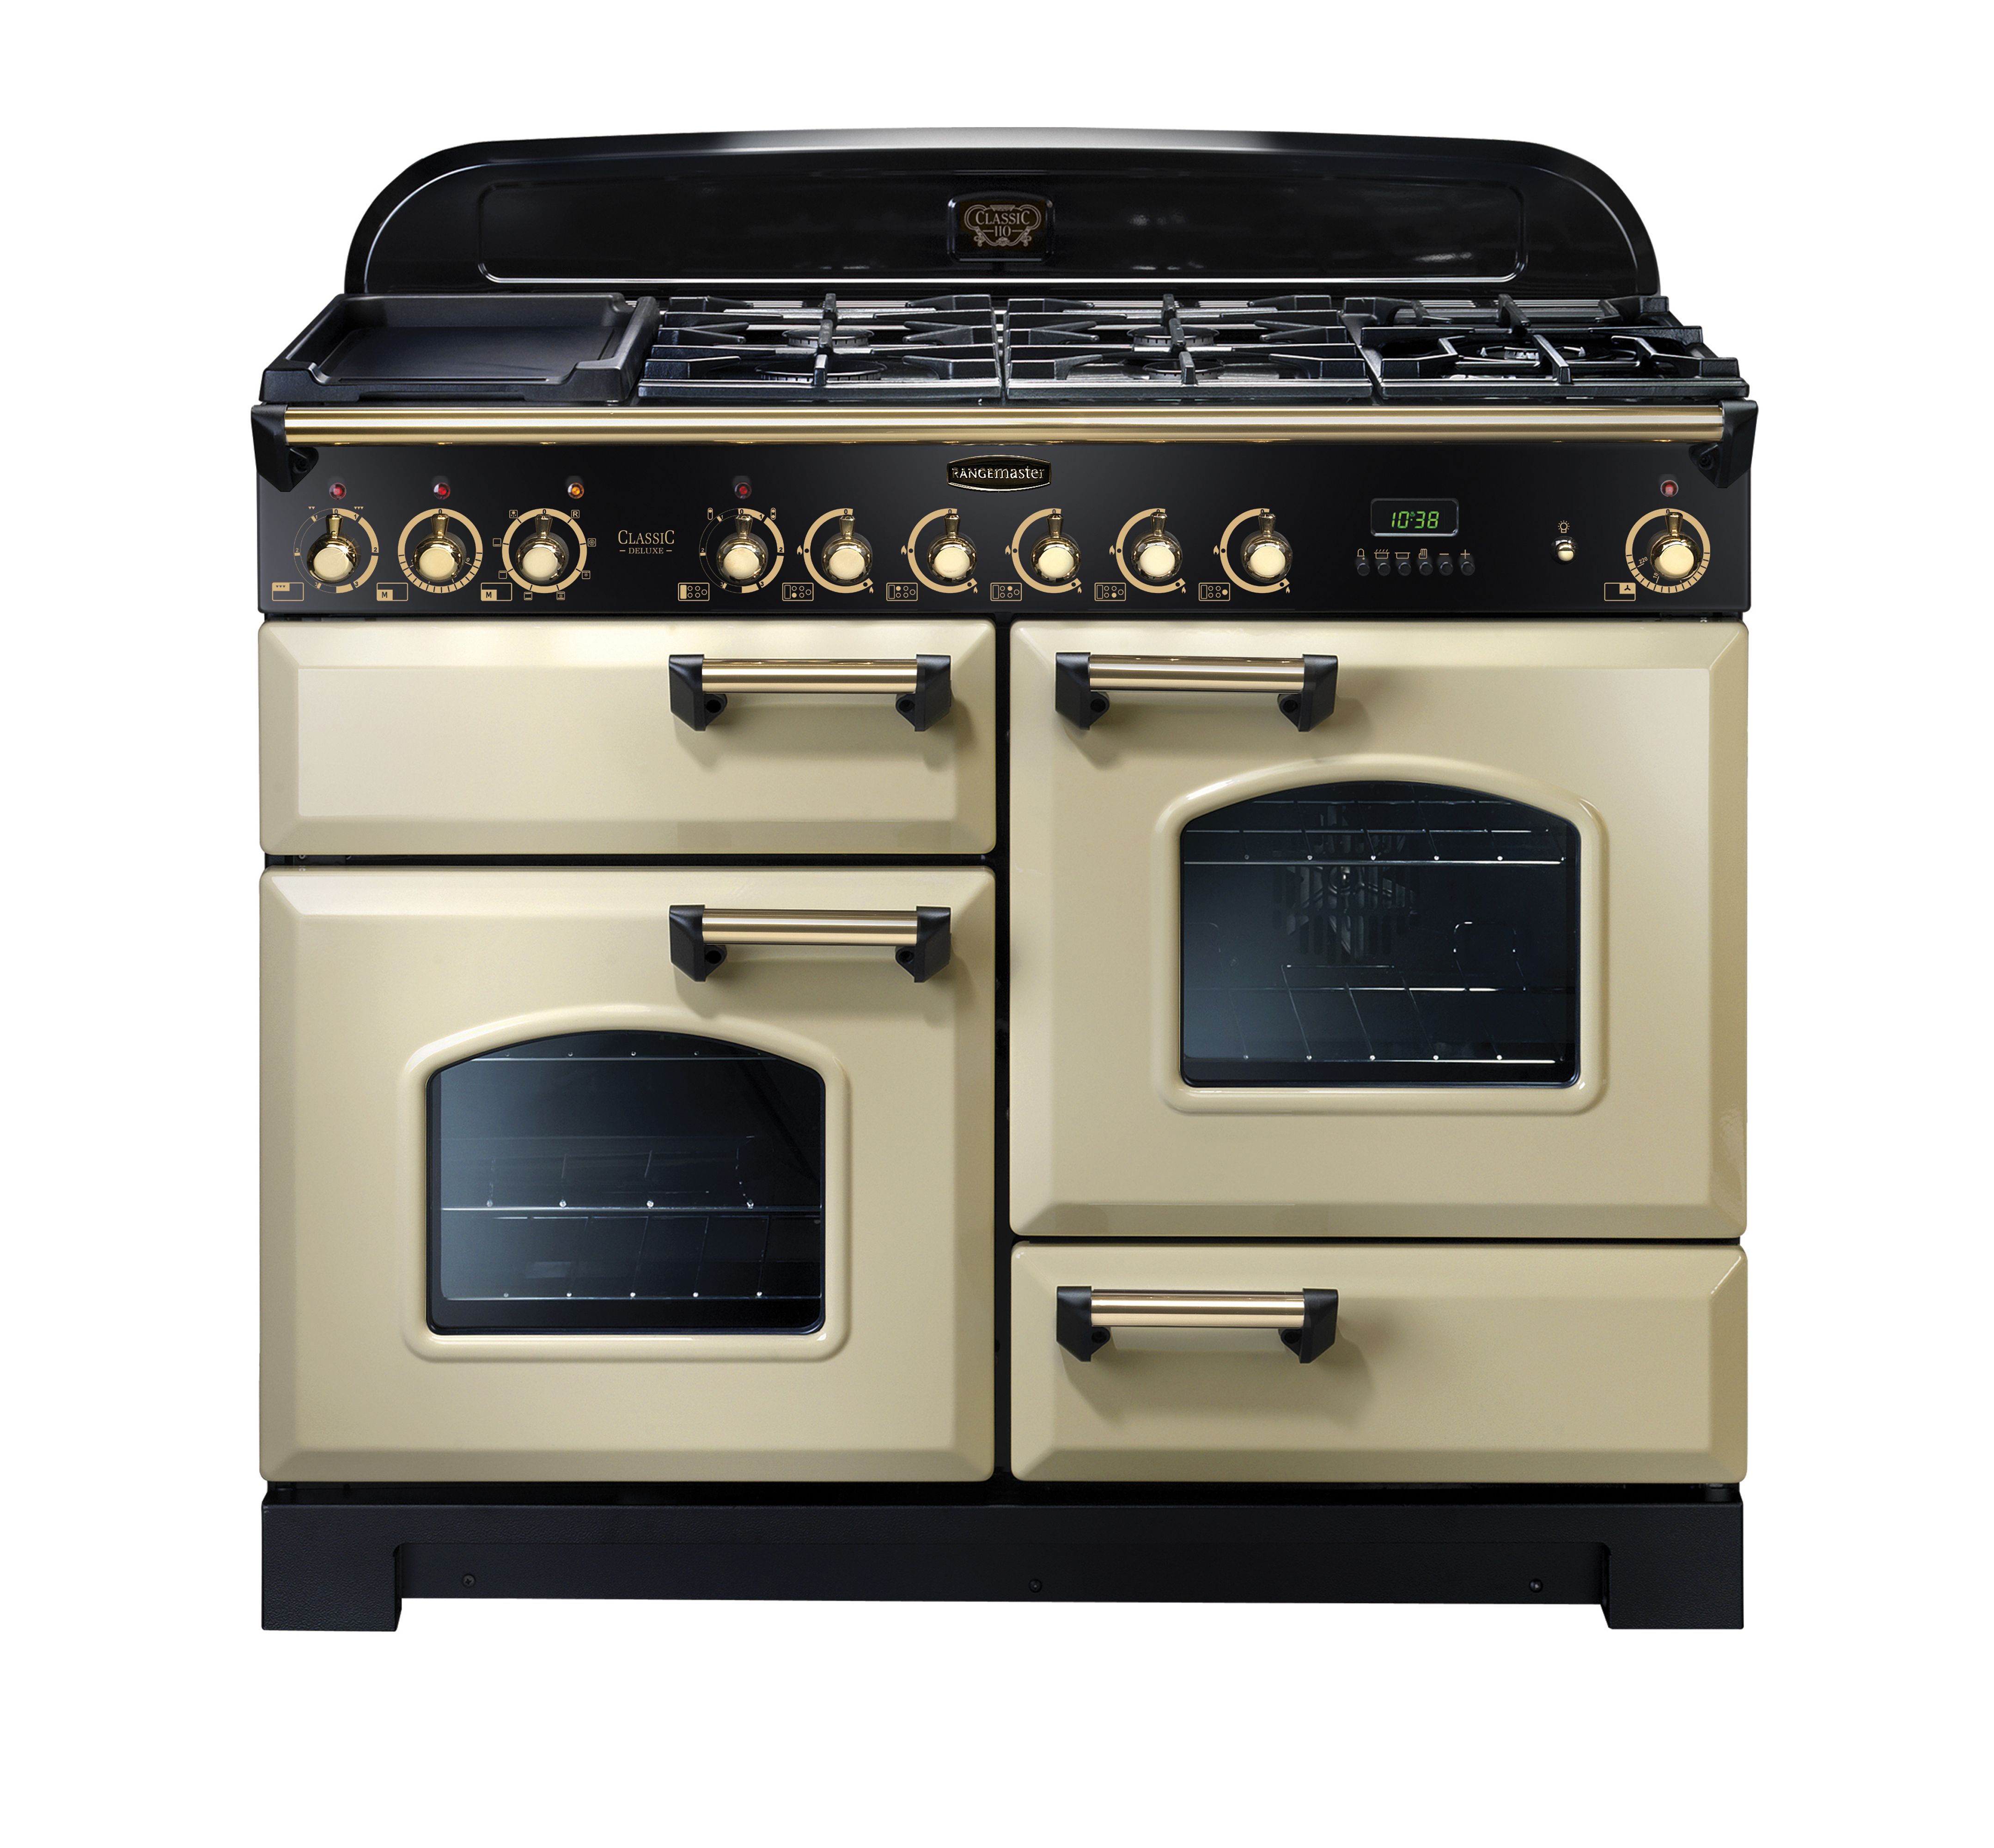 Rangemaster Classic Deluxe CDL110DFFCR/B 110cm Dual Fuel Range Cooker - Cream / Brass - A/A Rated, Cream